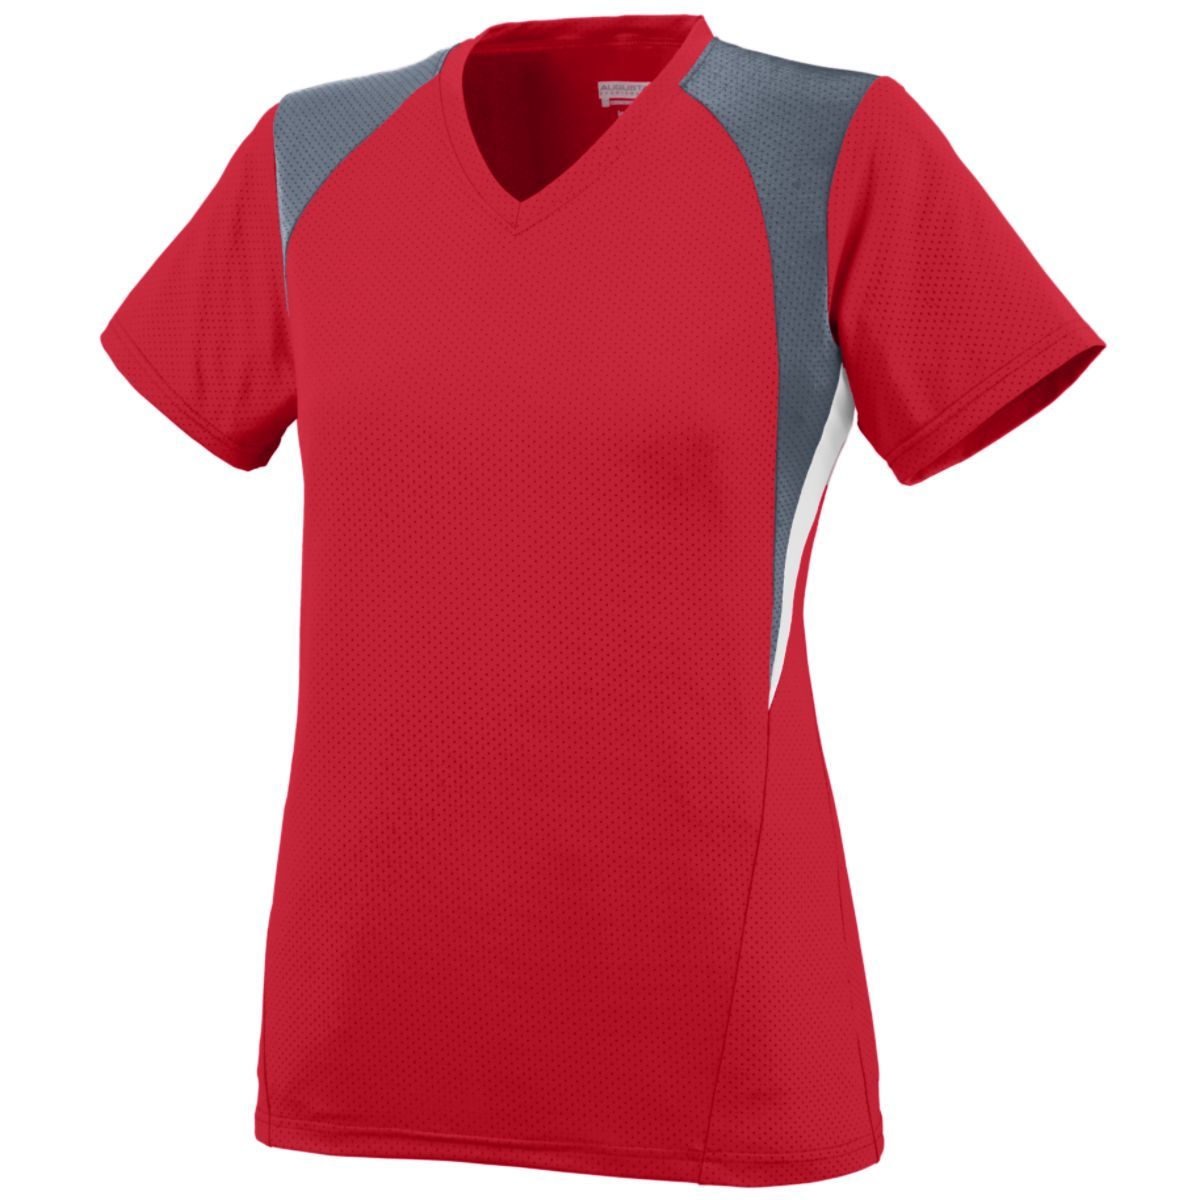 Augusta Sportswear Girls Mystic Jersey in Red/Graphite/White  -Part of the Girls, Augusta-Products, Soccer, Girls-Jersey, Shirts, All-Sports-1 product lines at KanaleyCreations.com